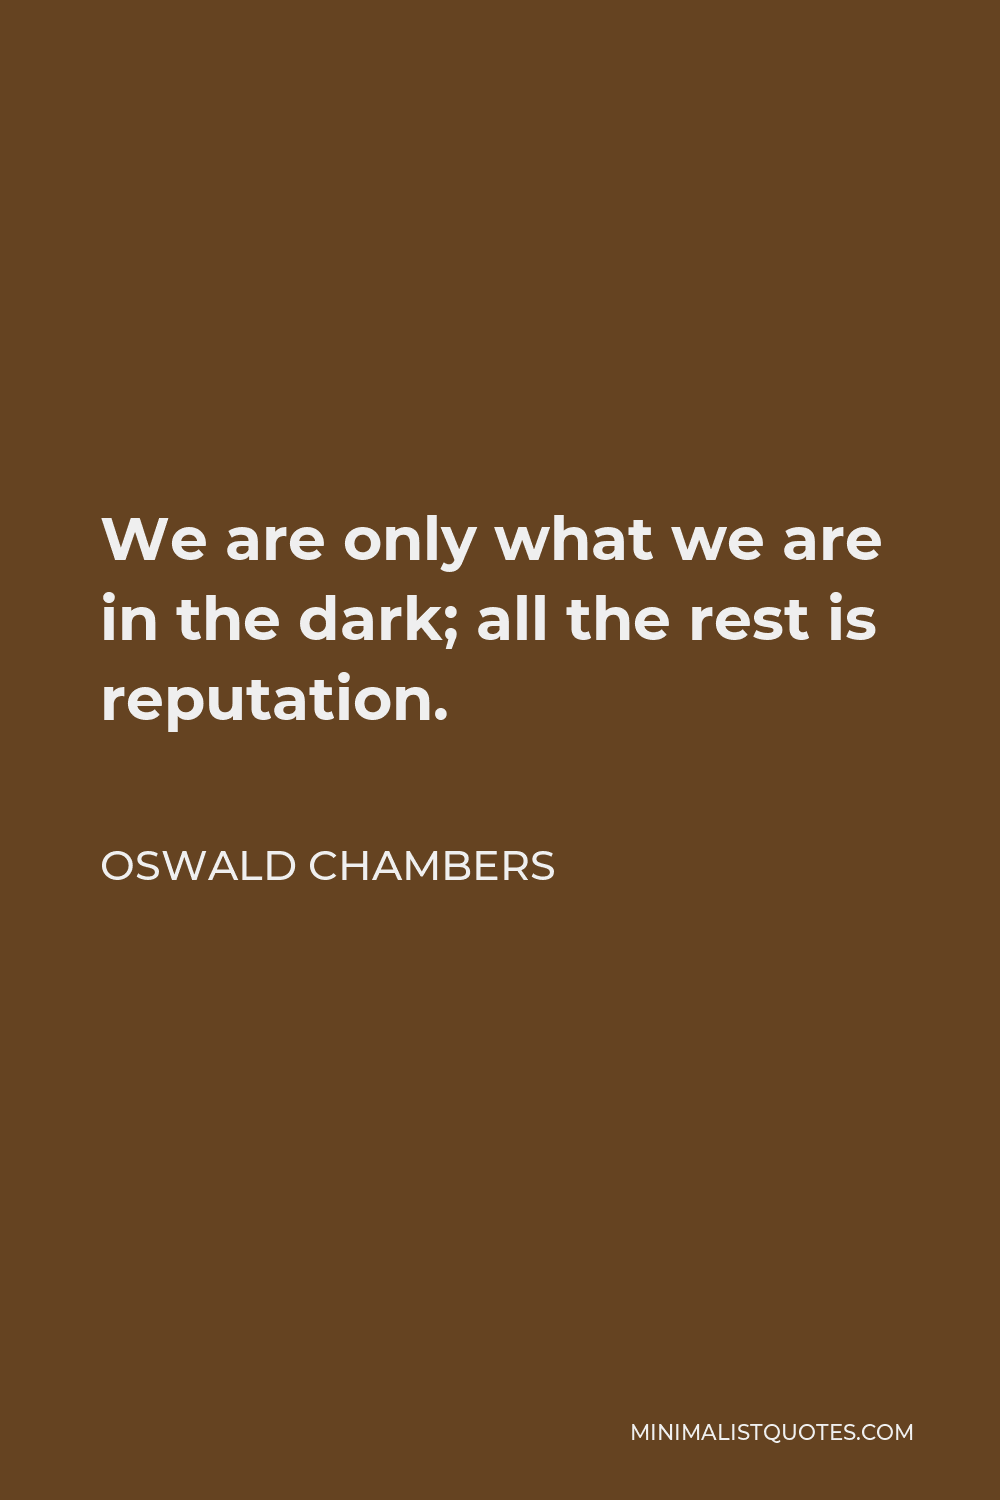 Oswald Chambers Quote - We are only what we are in the dark; all the rest is reputation.